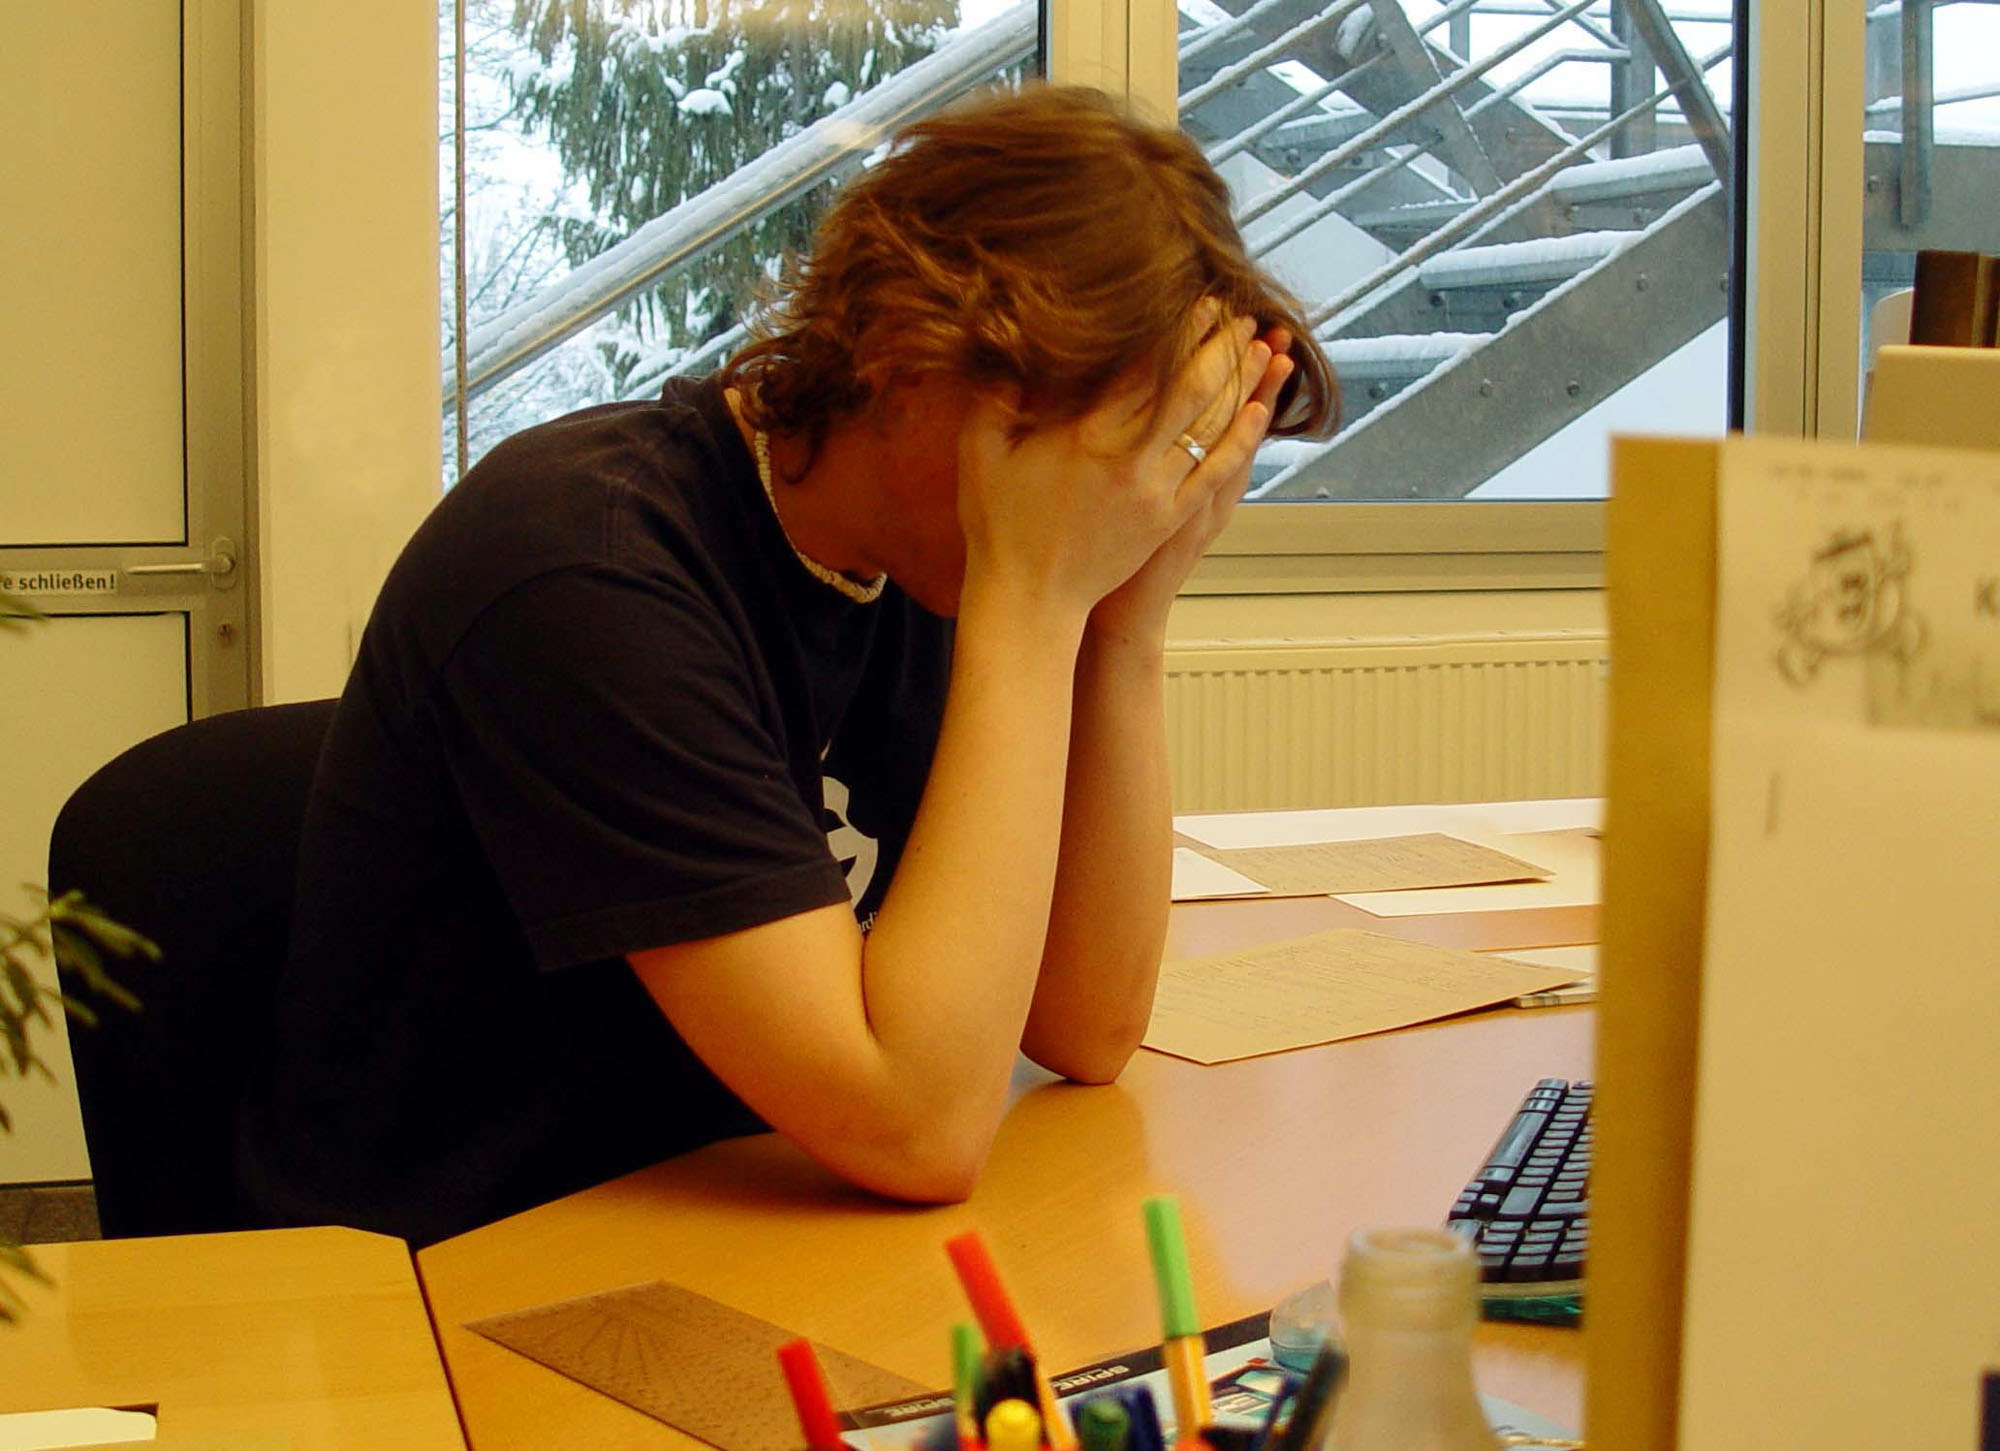 Image of a man with stress associated with cultural adjustment